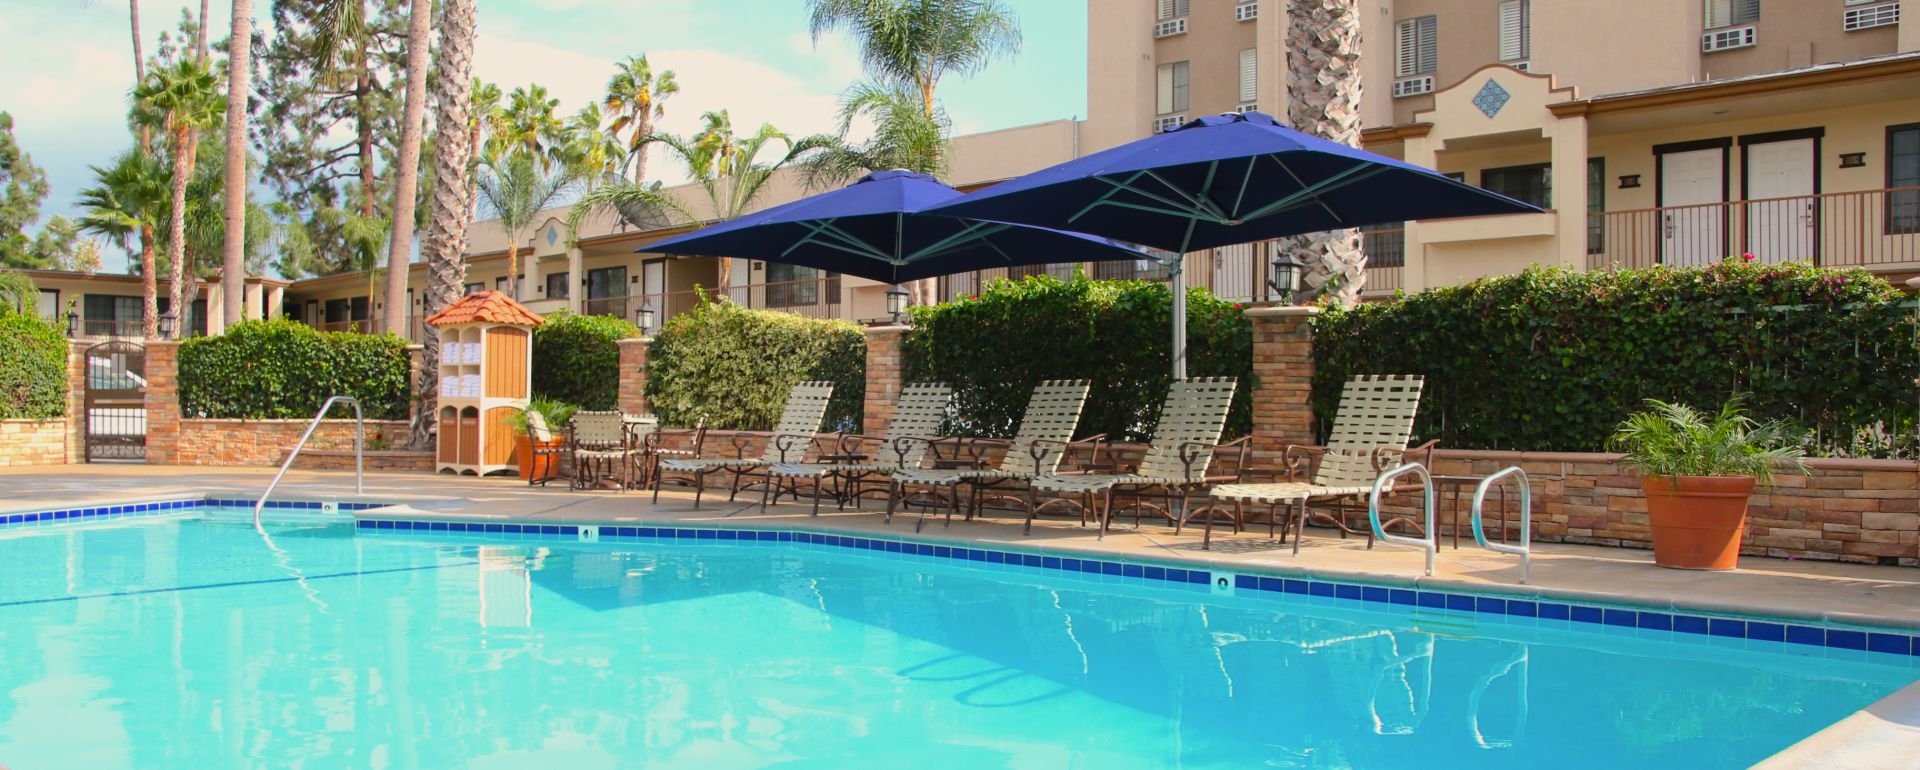 outdoor pool area at Park Vue Inn in Anaheim, CA